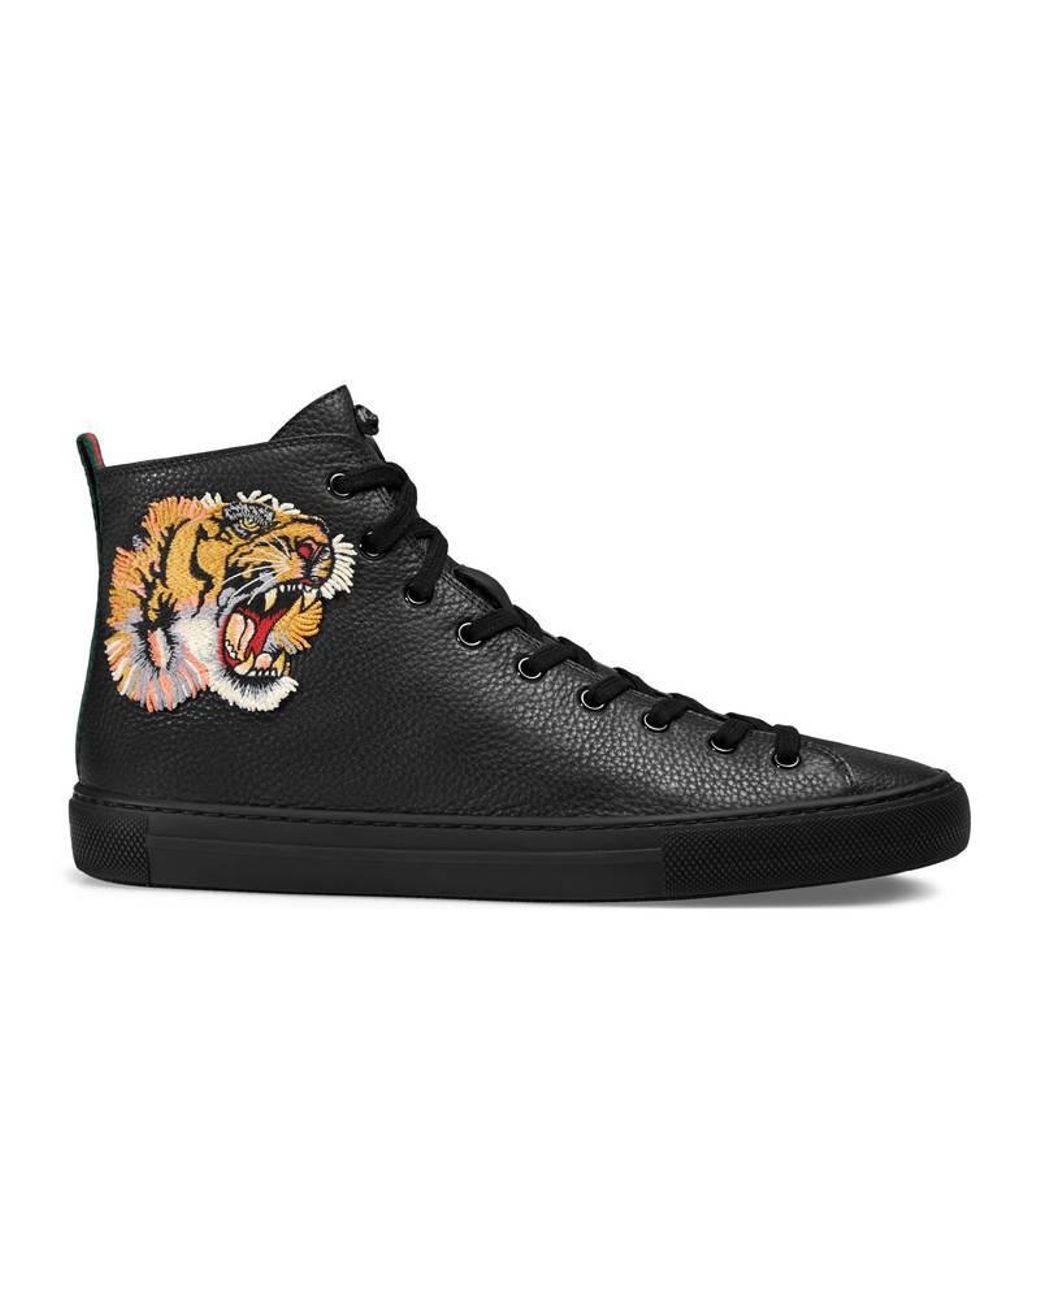 Gucci High-top Sneaker With Tiger for Men